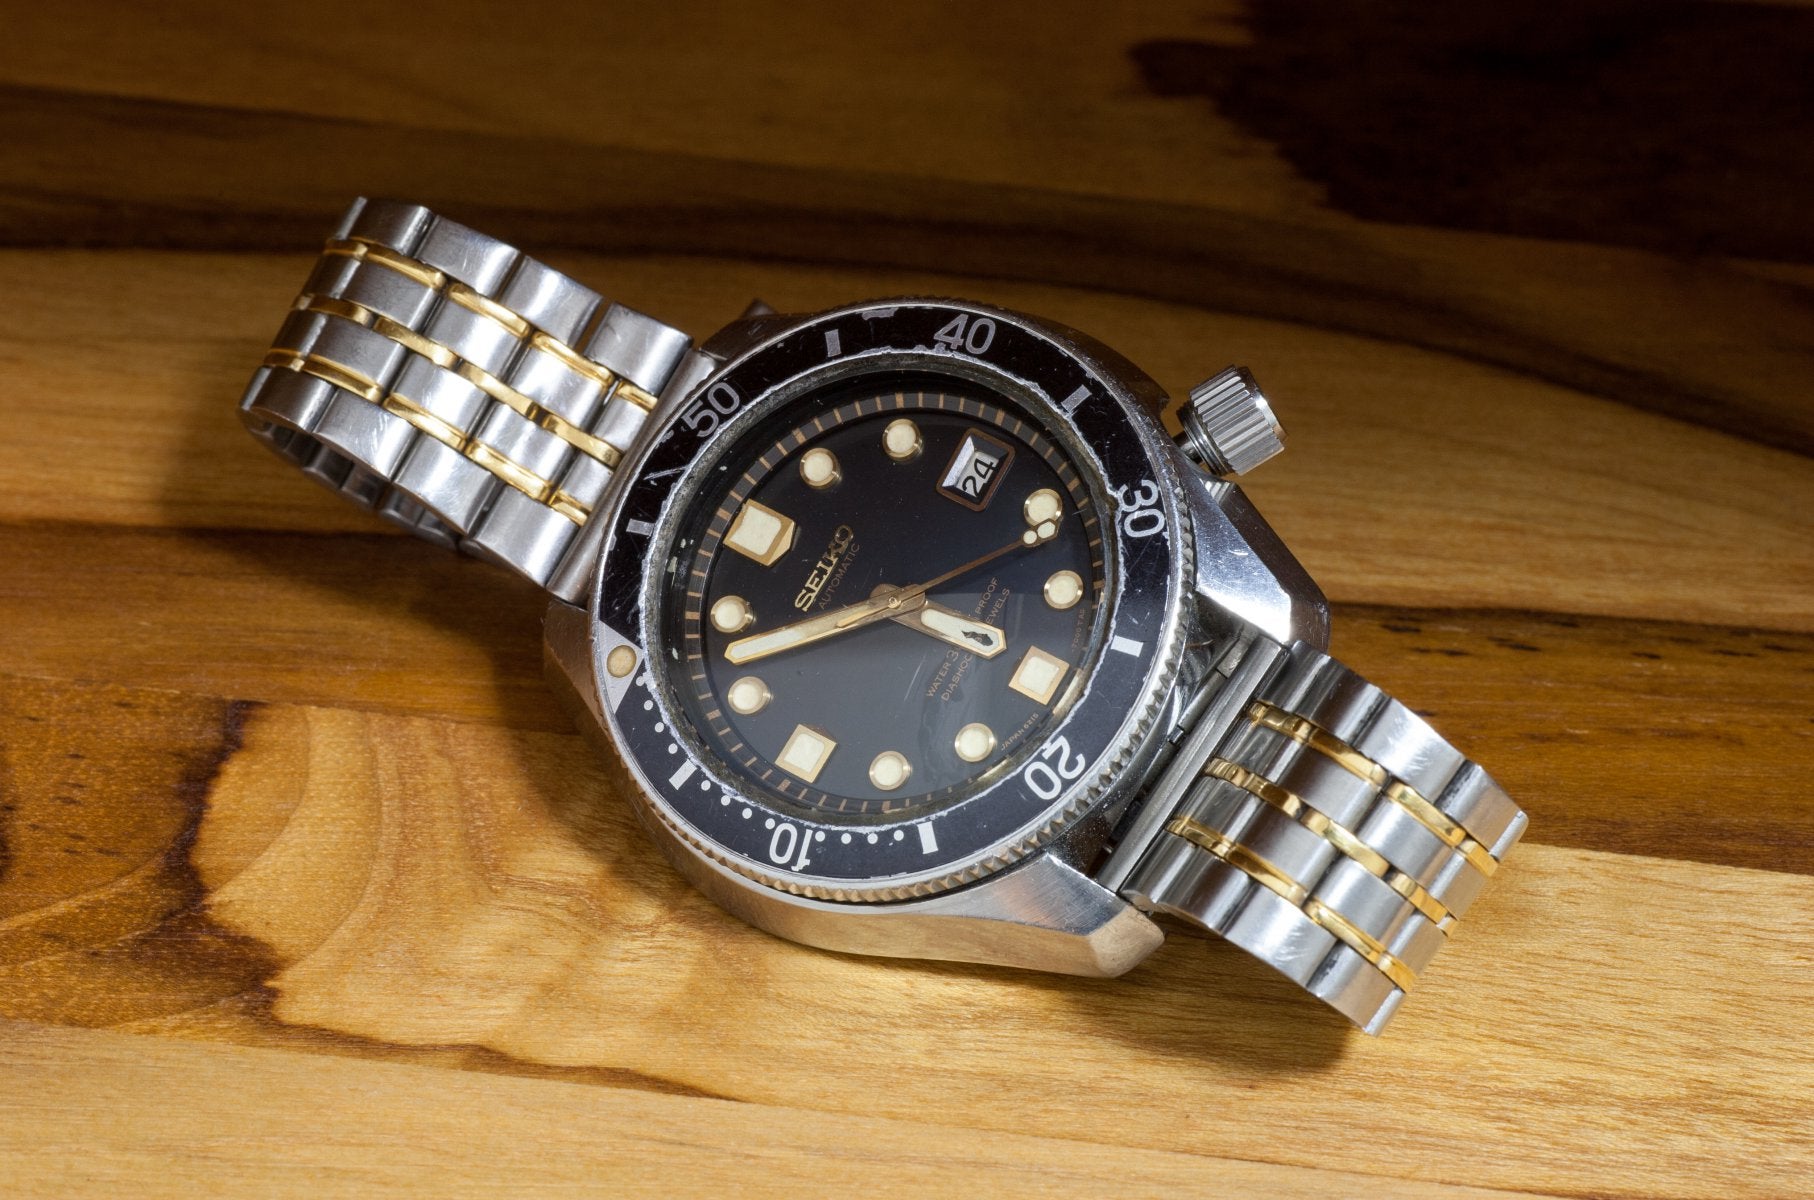 Seiko 6215-7000 Any ideas on what it is worth? | The Watch Site